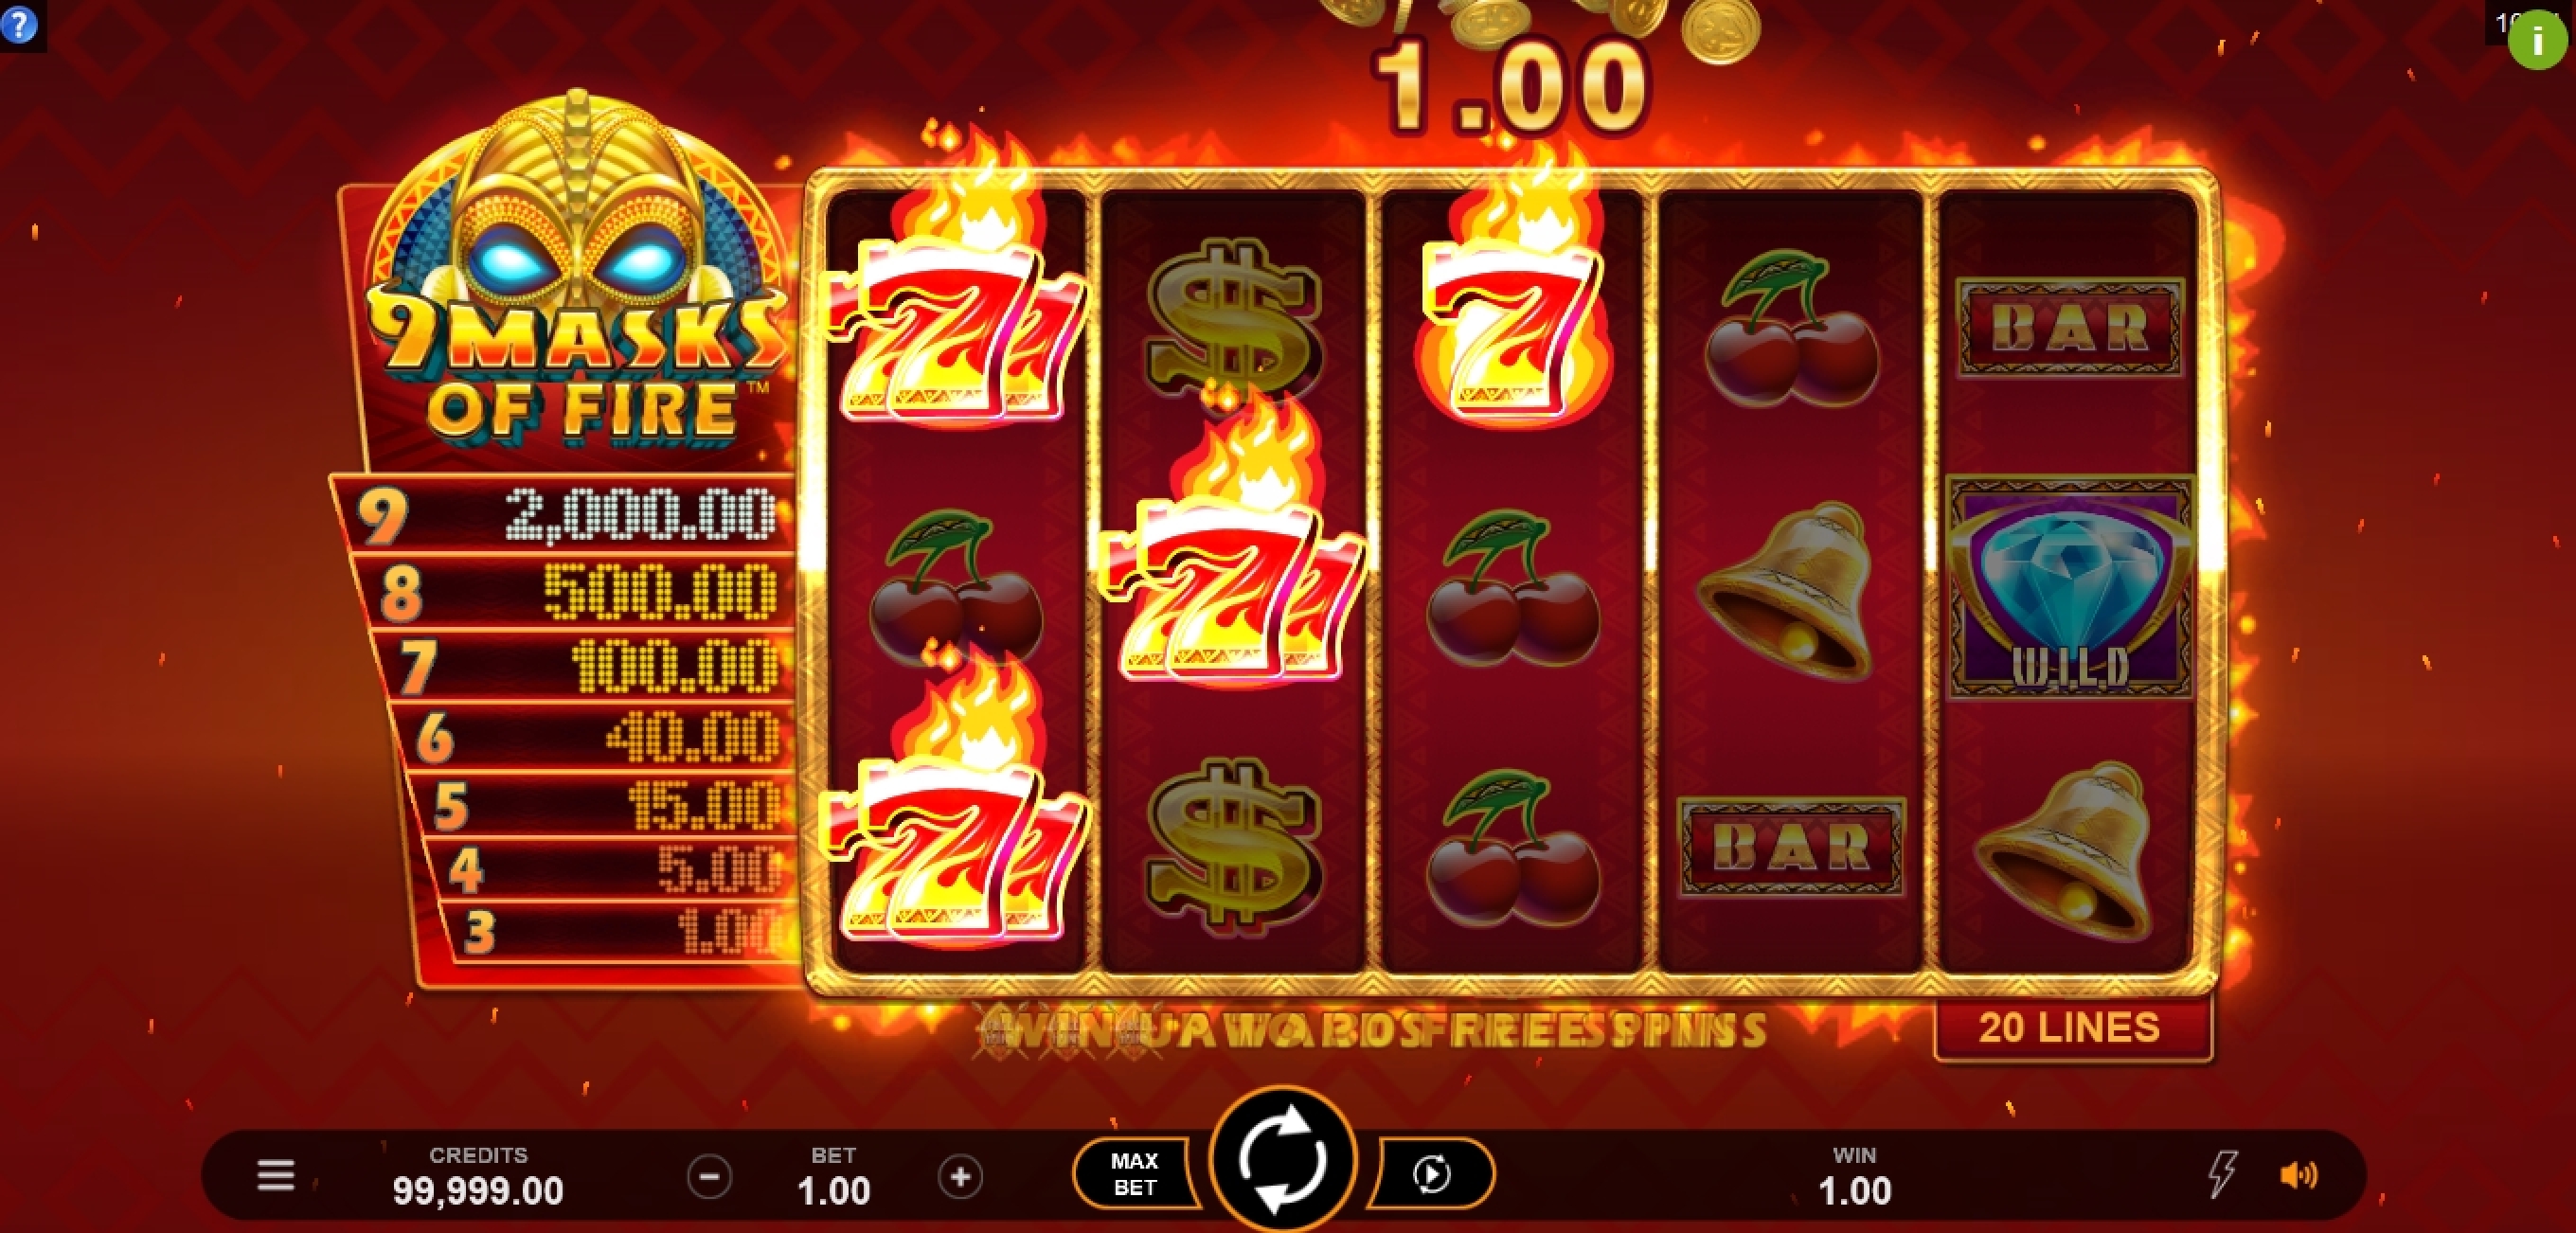 Win Money in 9 Masks Of Fire Free Slot Game by Gameburger Studios